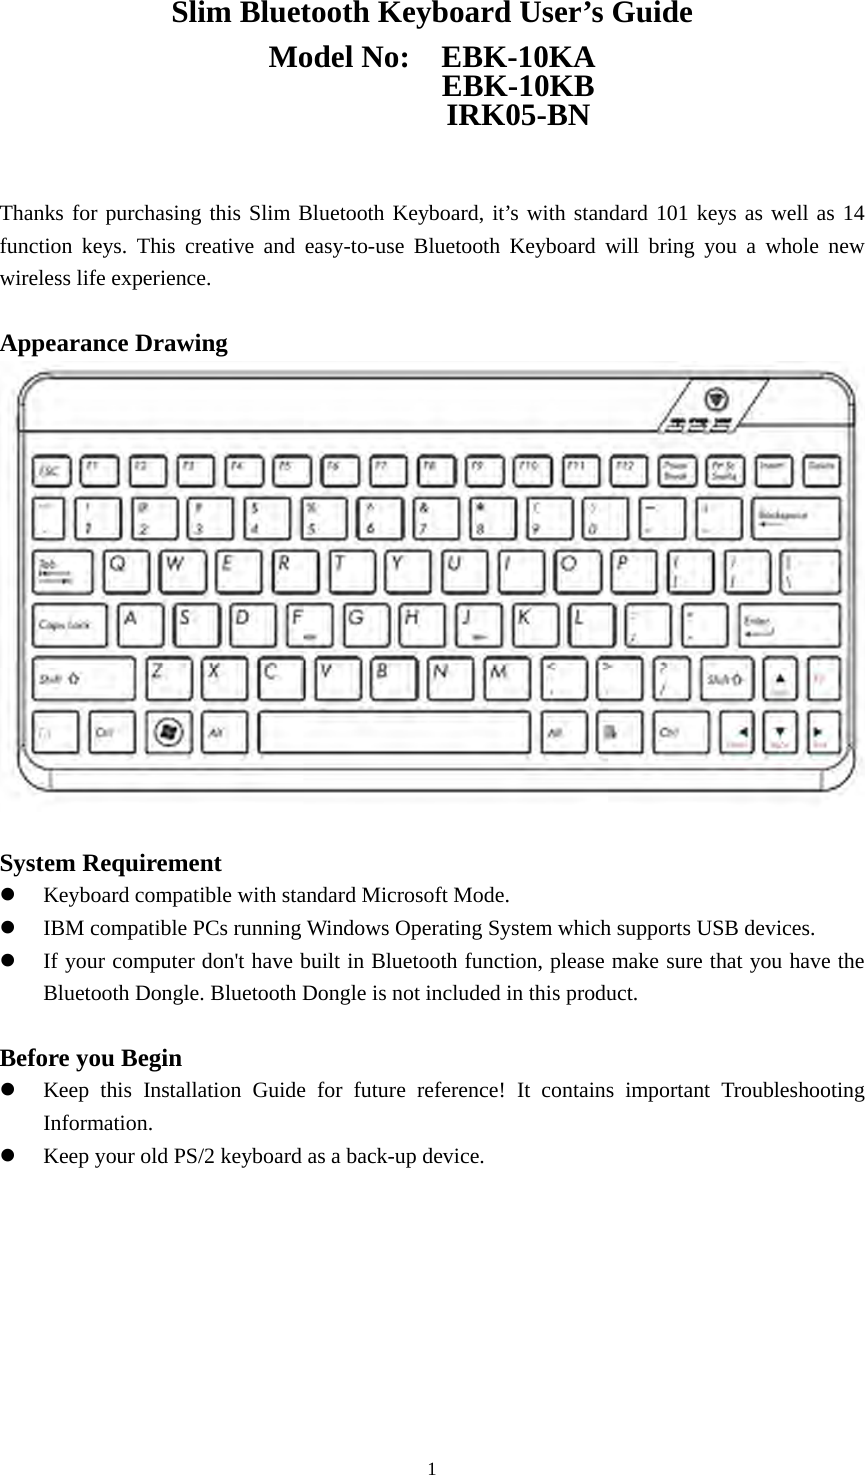  1Slim Bluetooth Keyboard User’s Guide Model No:  EBK-10KA            EBK-10KB            IRK05-BN   Thanks for purchasing this Slim Bluetooth Keyboard, it’s with standard 101 keys as well as 14 function keys. This creative and easy-to-use Bluetooth Keyboard will bring you a whole new wireless life experience.  Appearance Drawing   System Requirement z Keyboard compatible with standard Microsoft Mode. z IBM compatible PCs running Windows Operating System which supports USB devices. z If your computer don&apos;t have built in Bluetooth function, please make sure that you have the Bluetooth Dongle. Bluetooth Dongle is not included in this product.  Before you Begin z Keep this Installation Guide for future reference! It contains important Troubleshooting Information. z Keep your old PS/2 keyboard as a back-up device.         